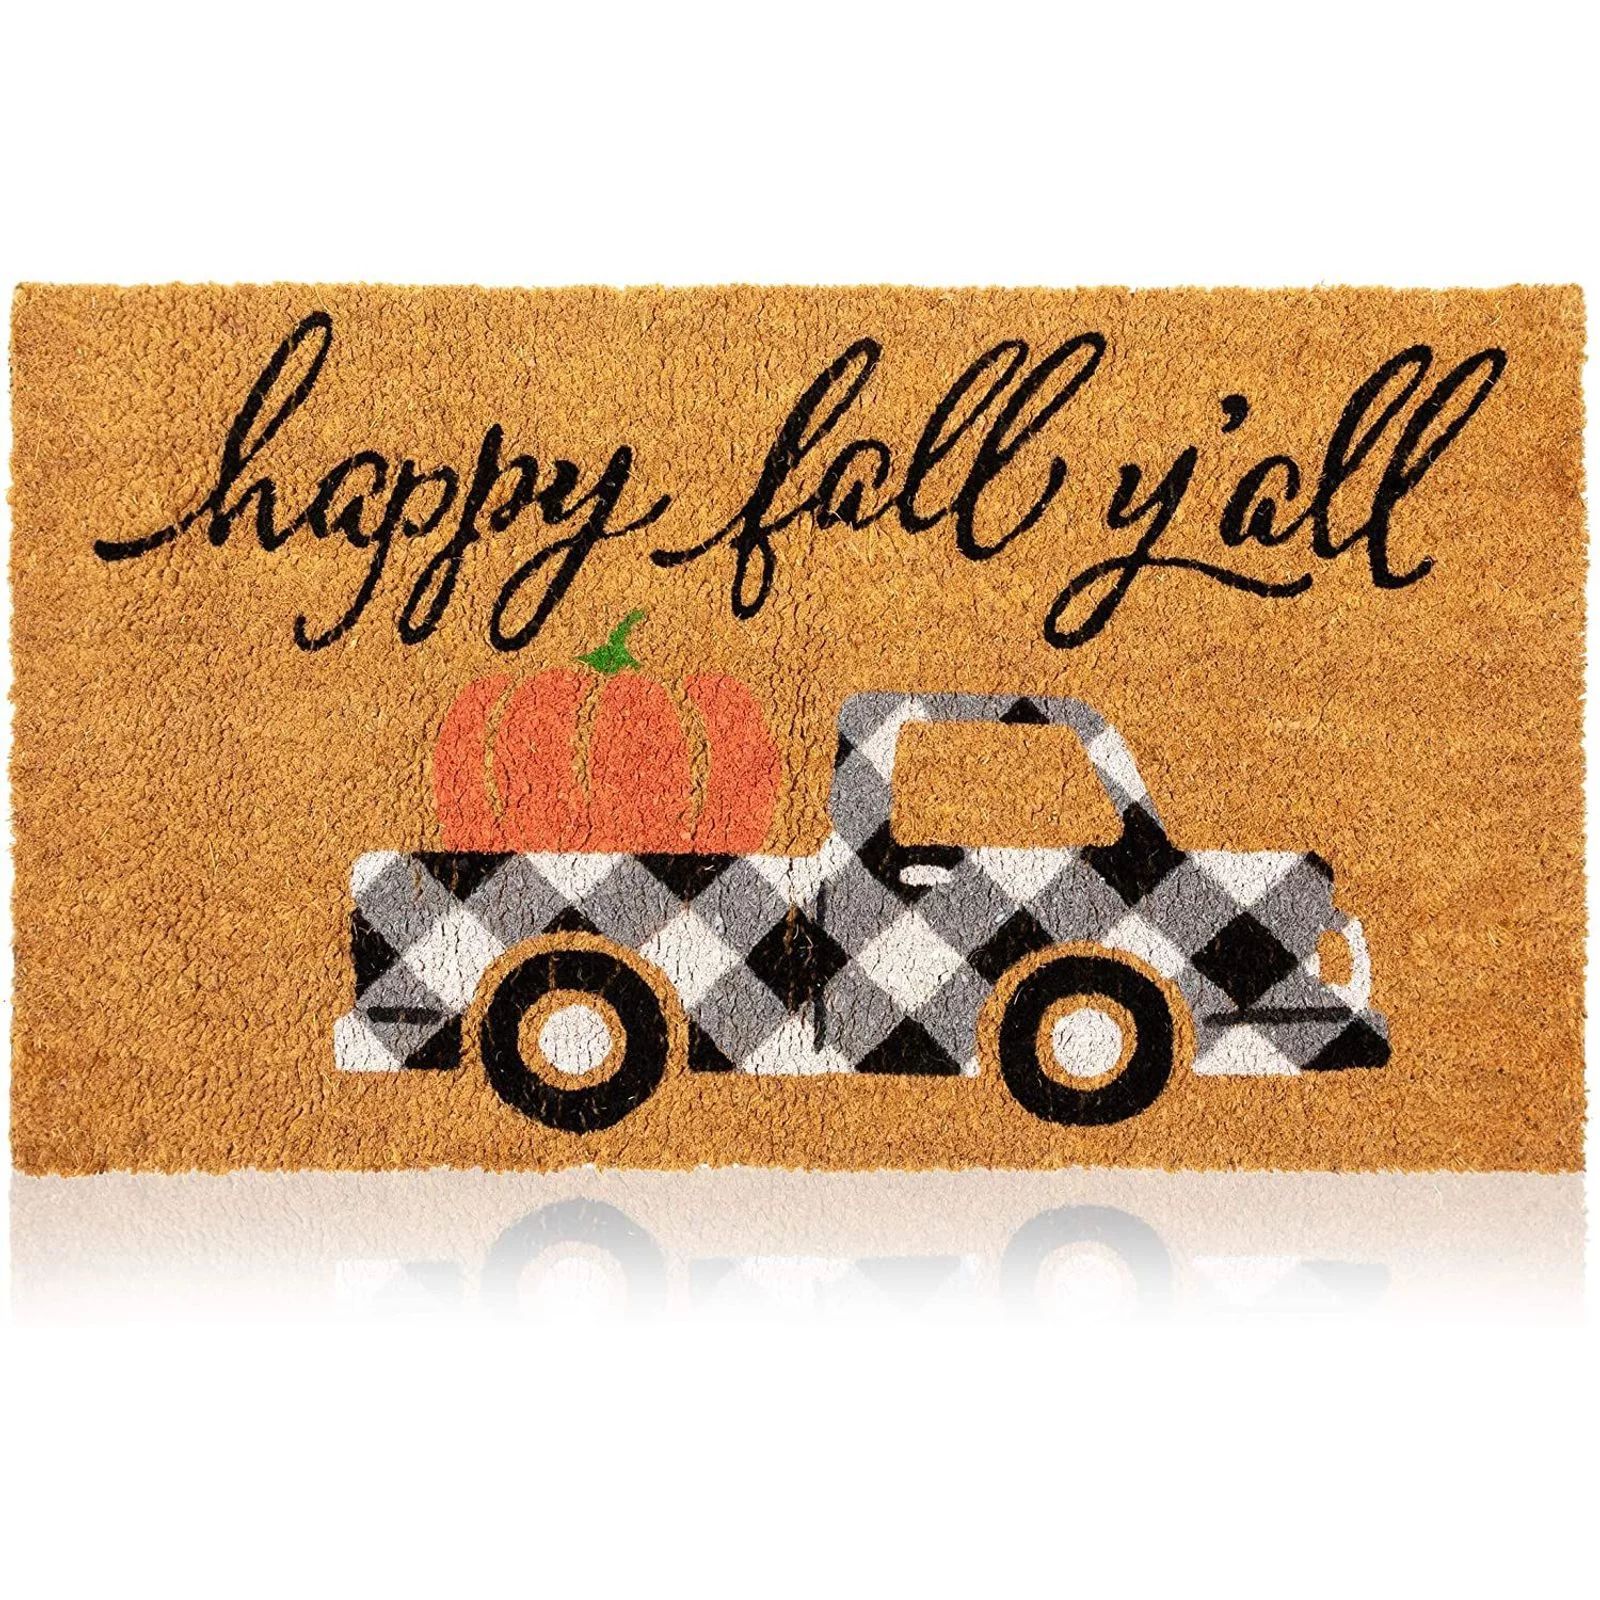 Natural Coir Welcome Door Mat, Happy Fall Y'all, Autumn Decor, 30 x 17 inches | Walmart (US)